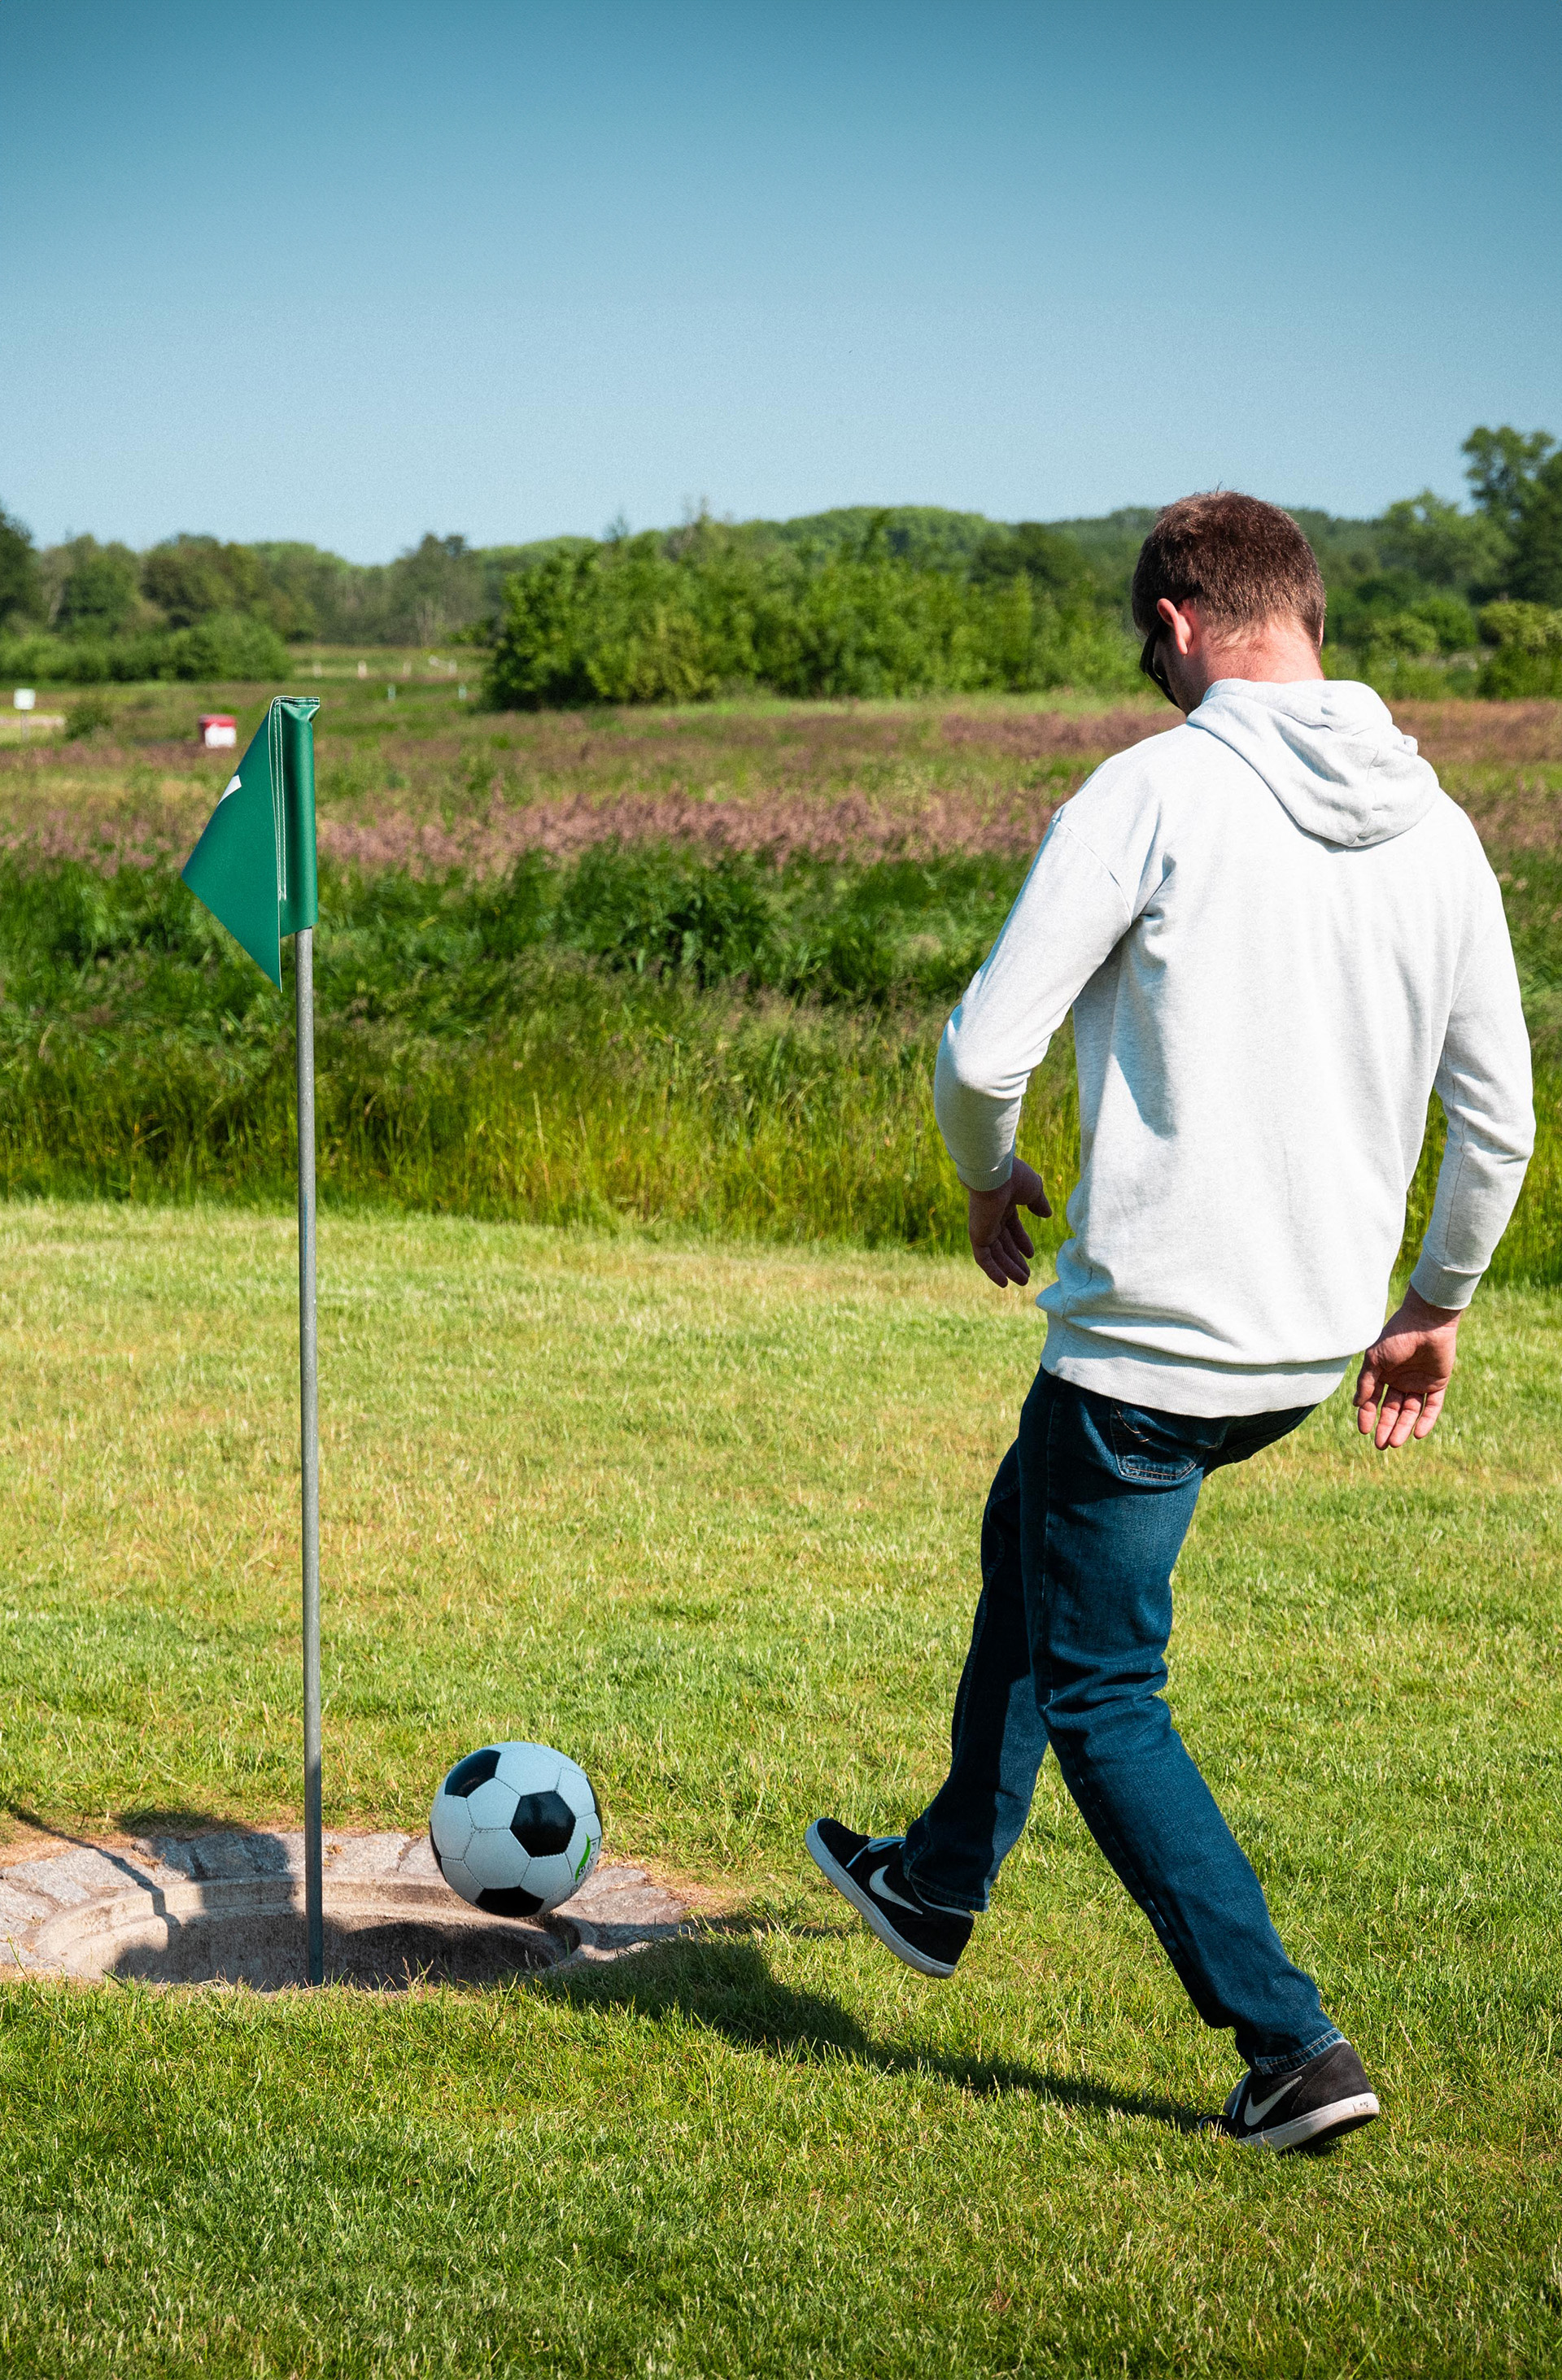 Footgolf at Weissenhäusser Strand on the Baltic Sea